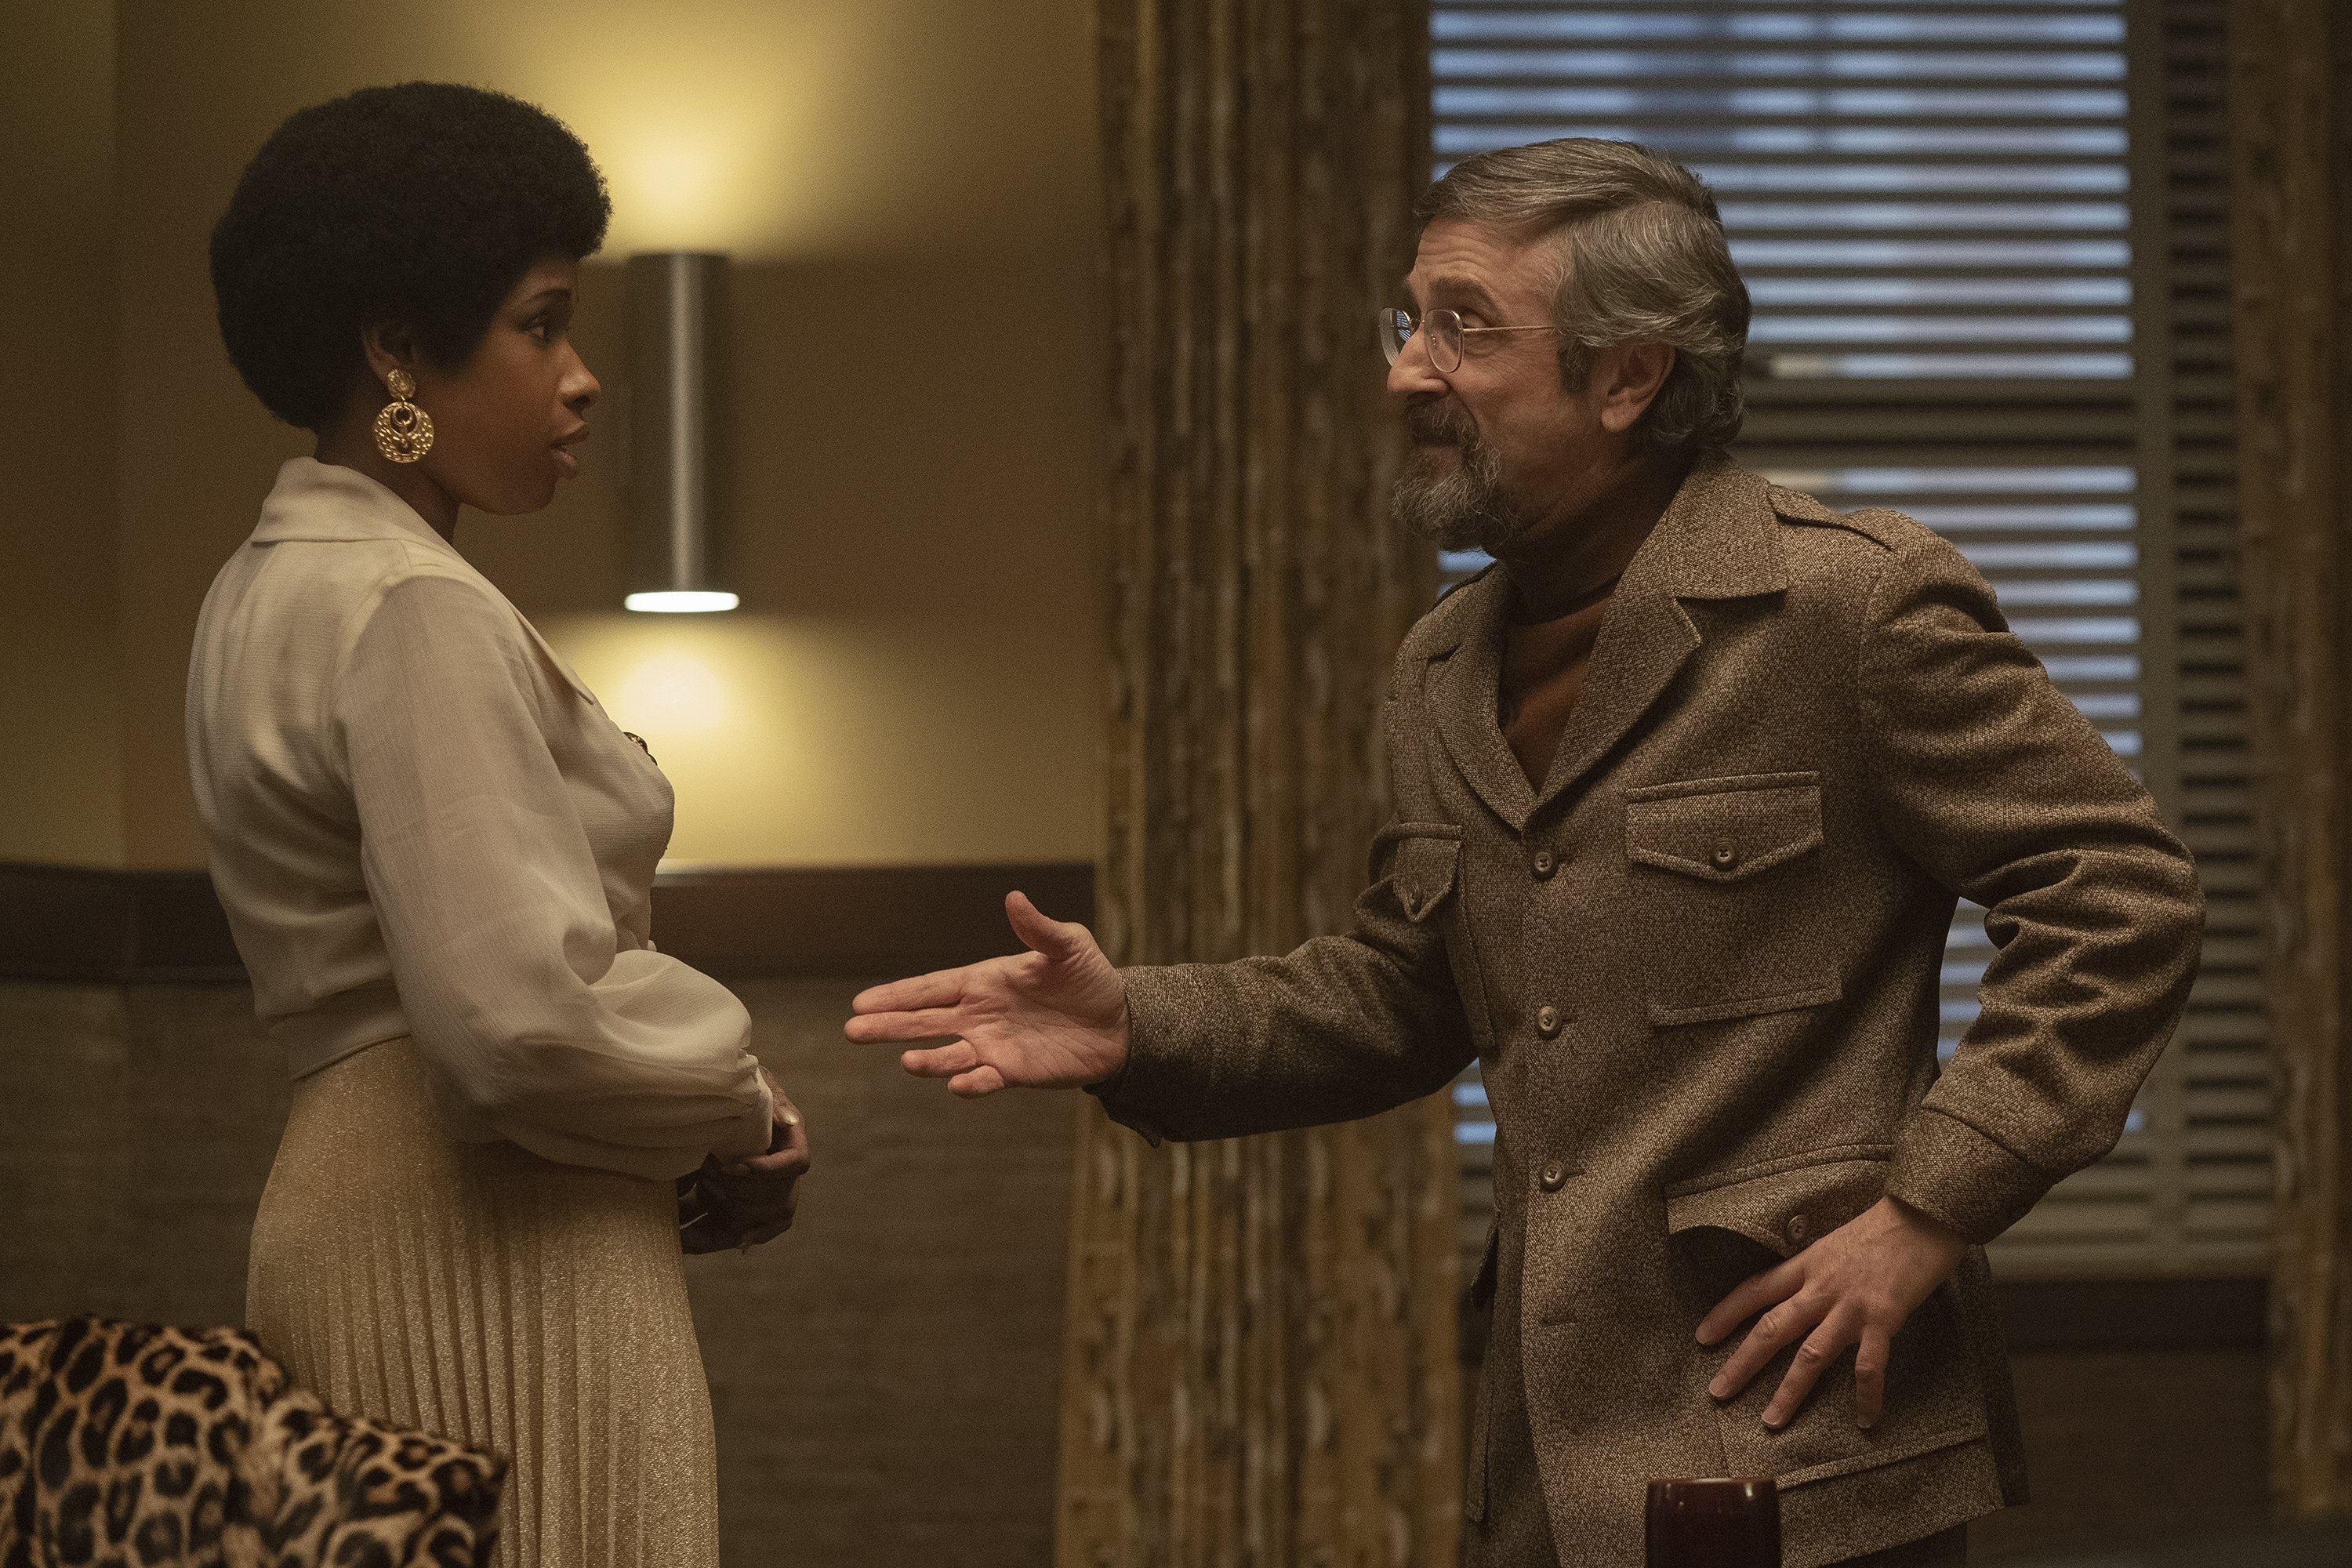 Jennifer Hudson stars as Aretha Franklin (L) and Marc Maron as Jerry Wexler (R) in a scene from "Respect." (MGM via AP)